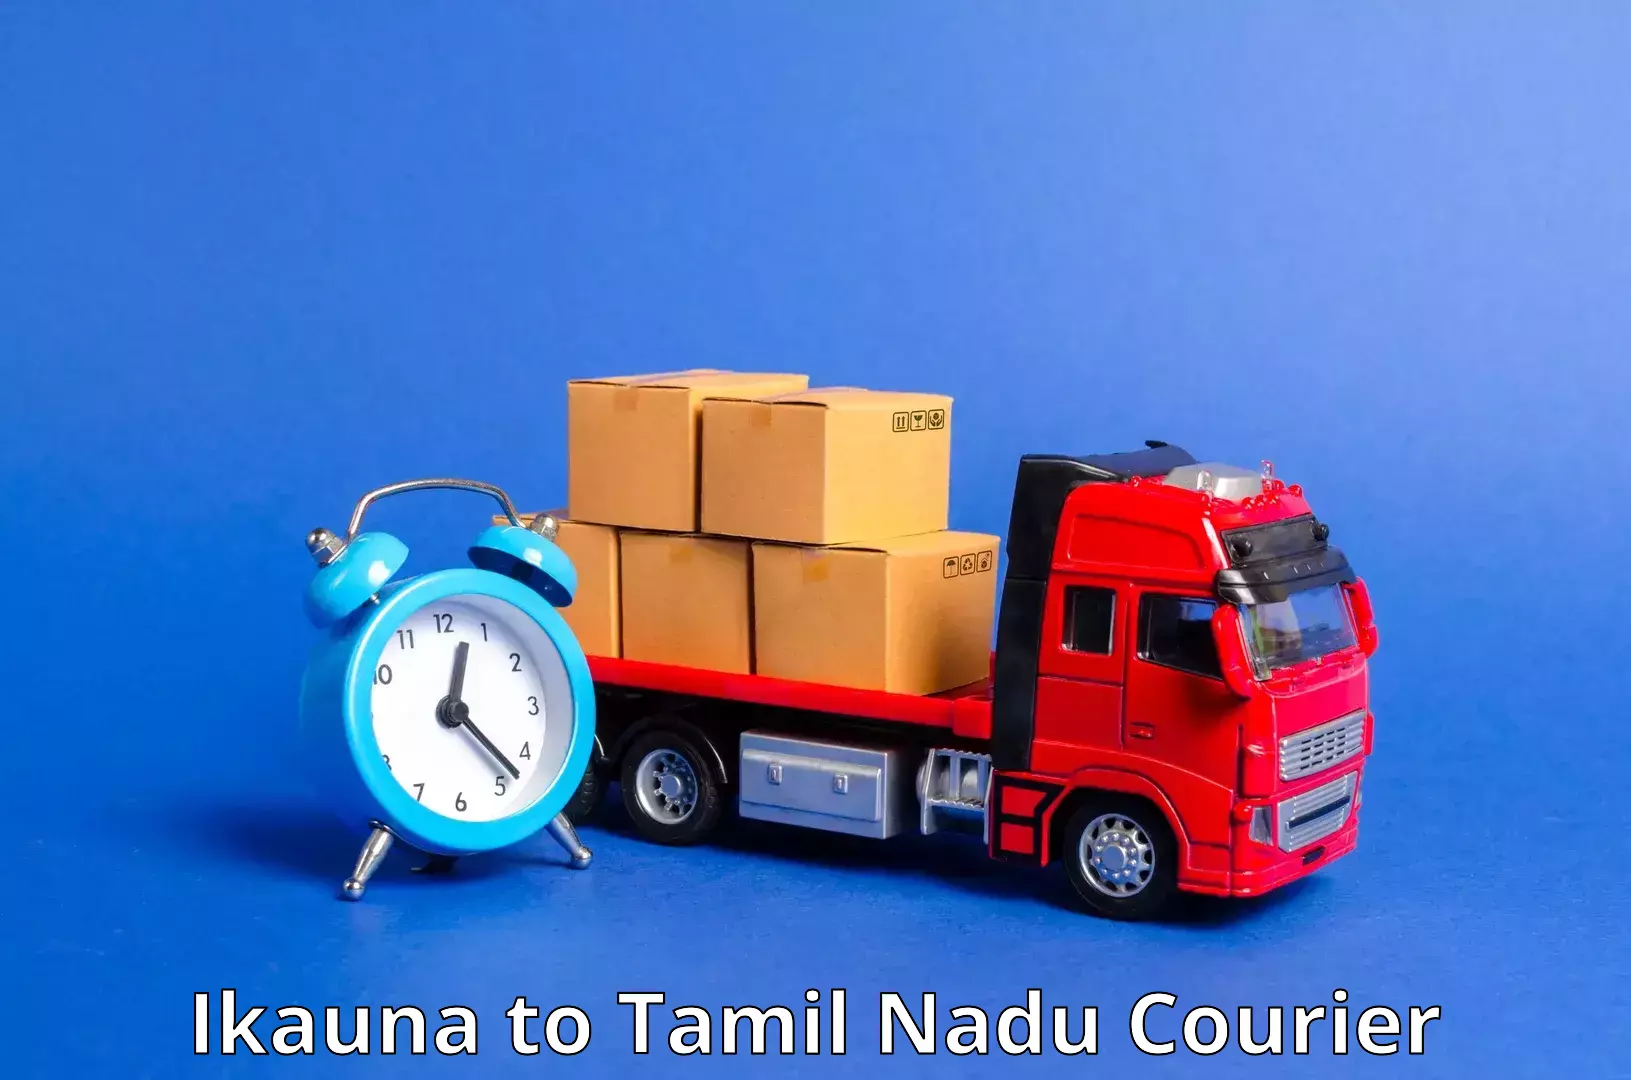 Comprehensive parcel tracking Ikauna to Ennore Port Chennai